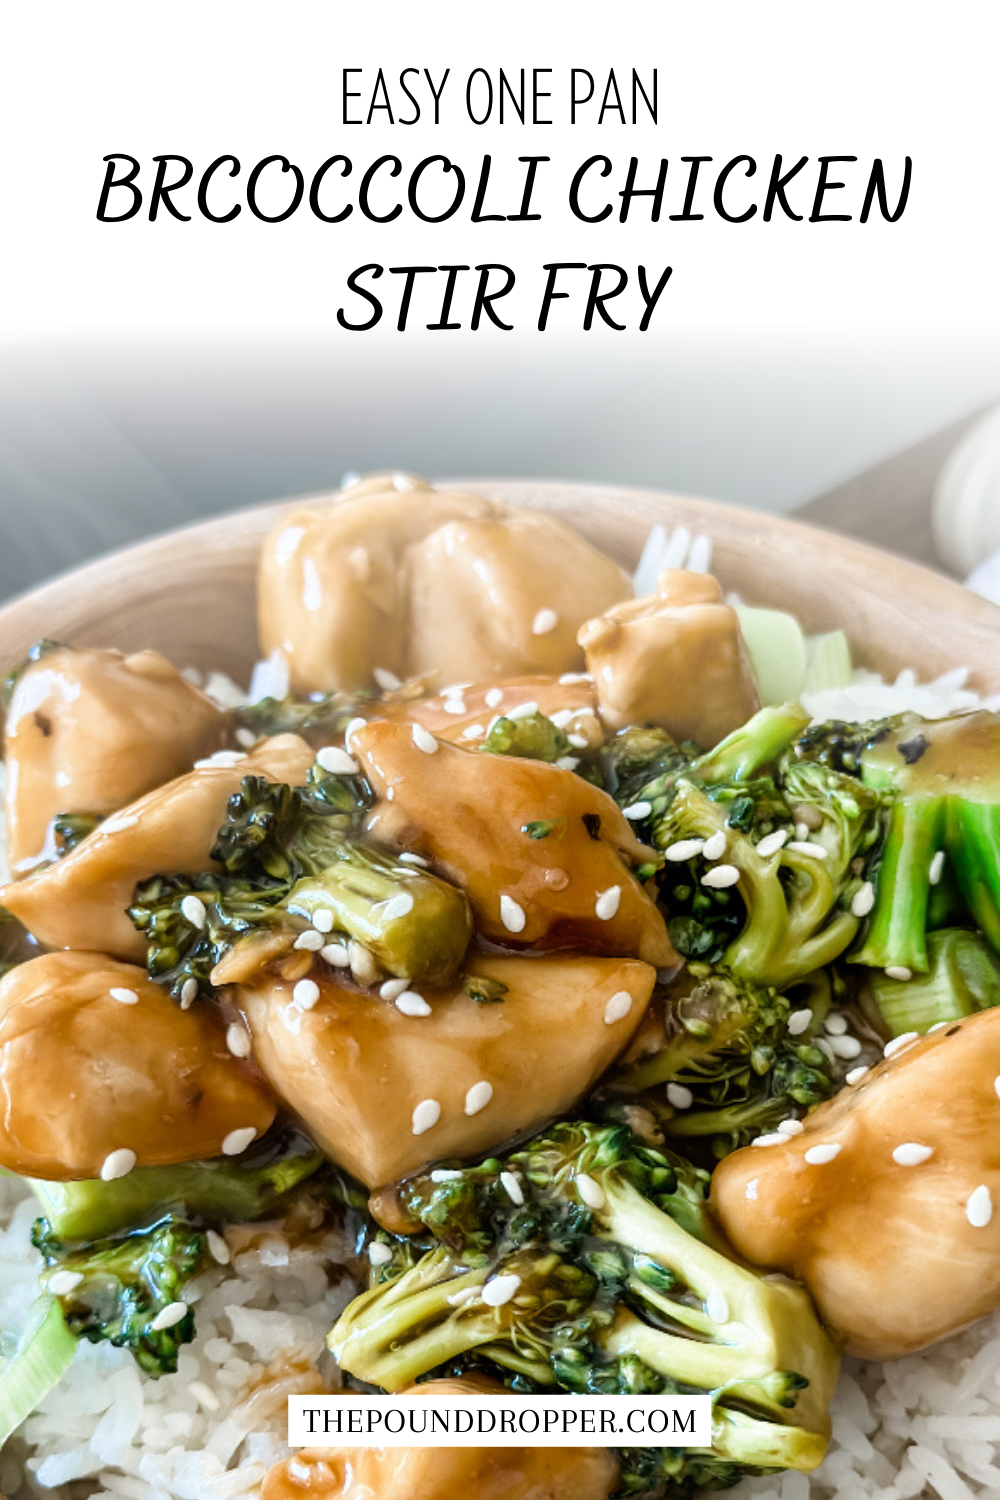 Easy One Pan Chicken and Broccoli Stir Fry via @pounddropper